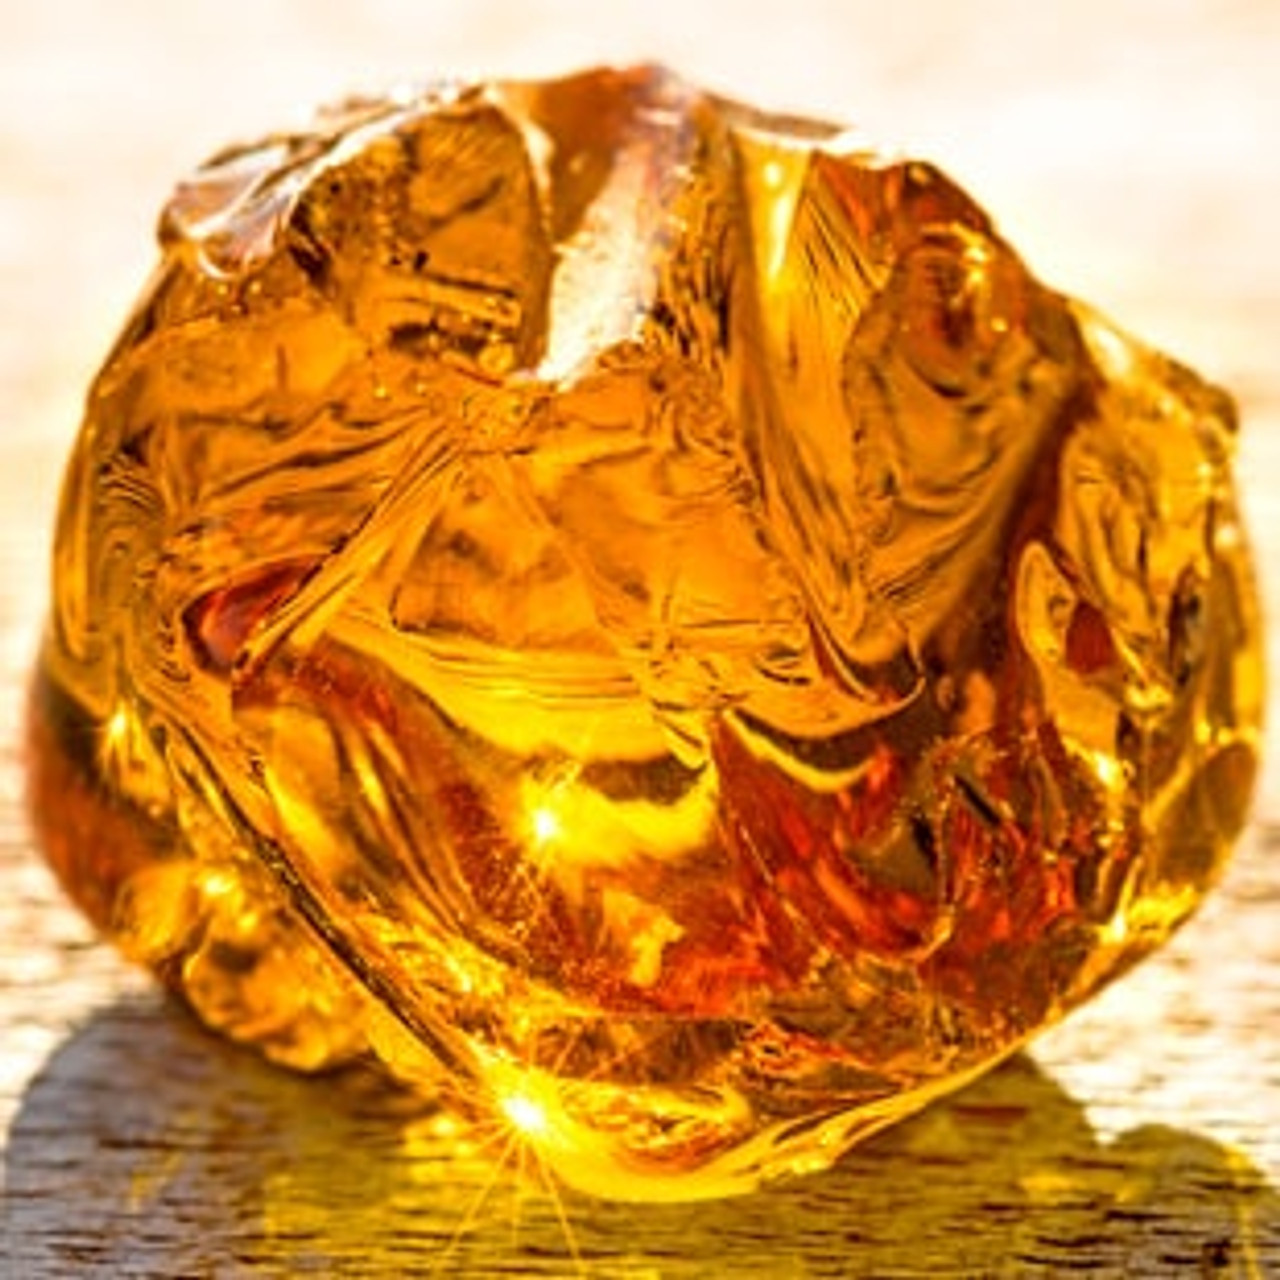 What is amber scent?